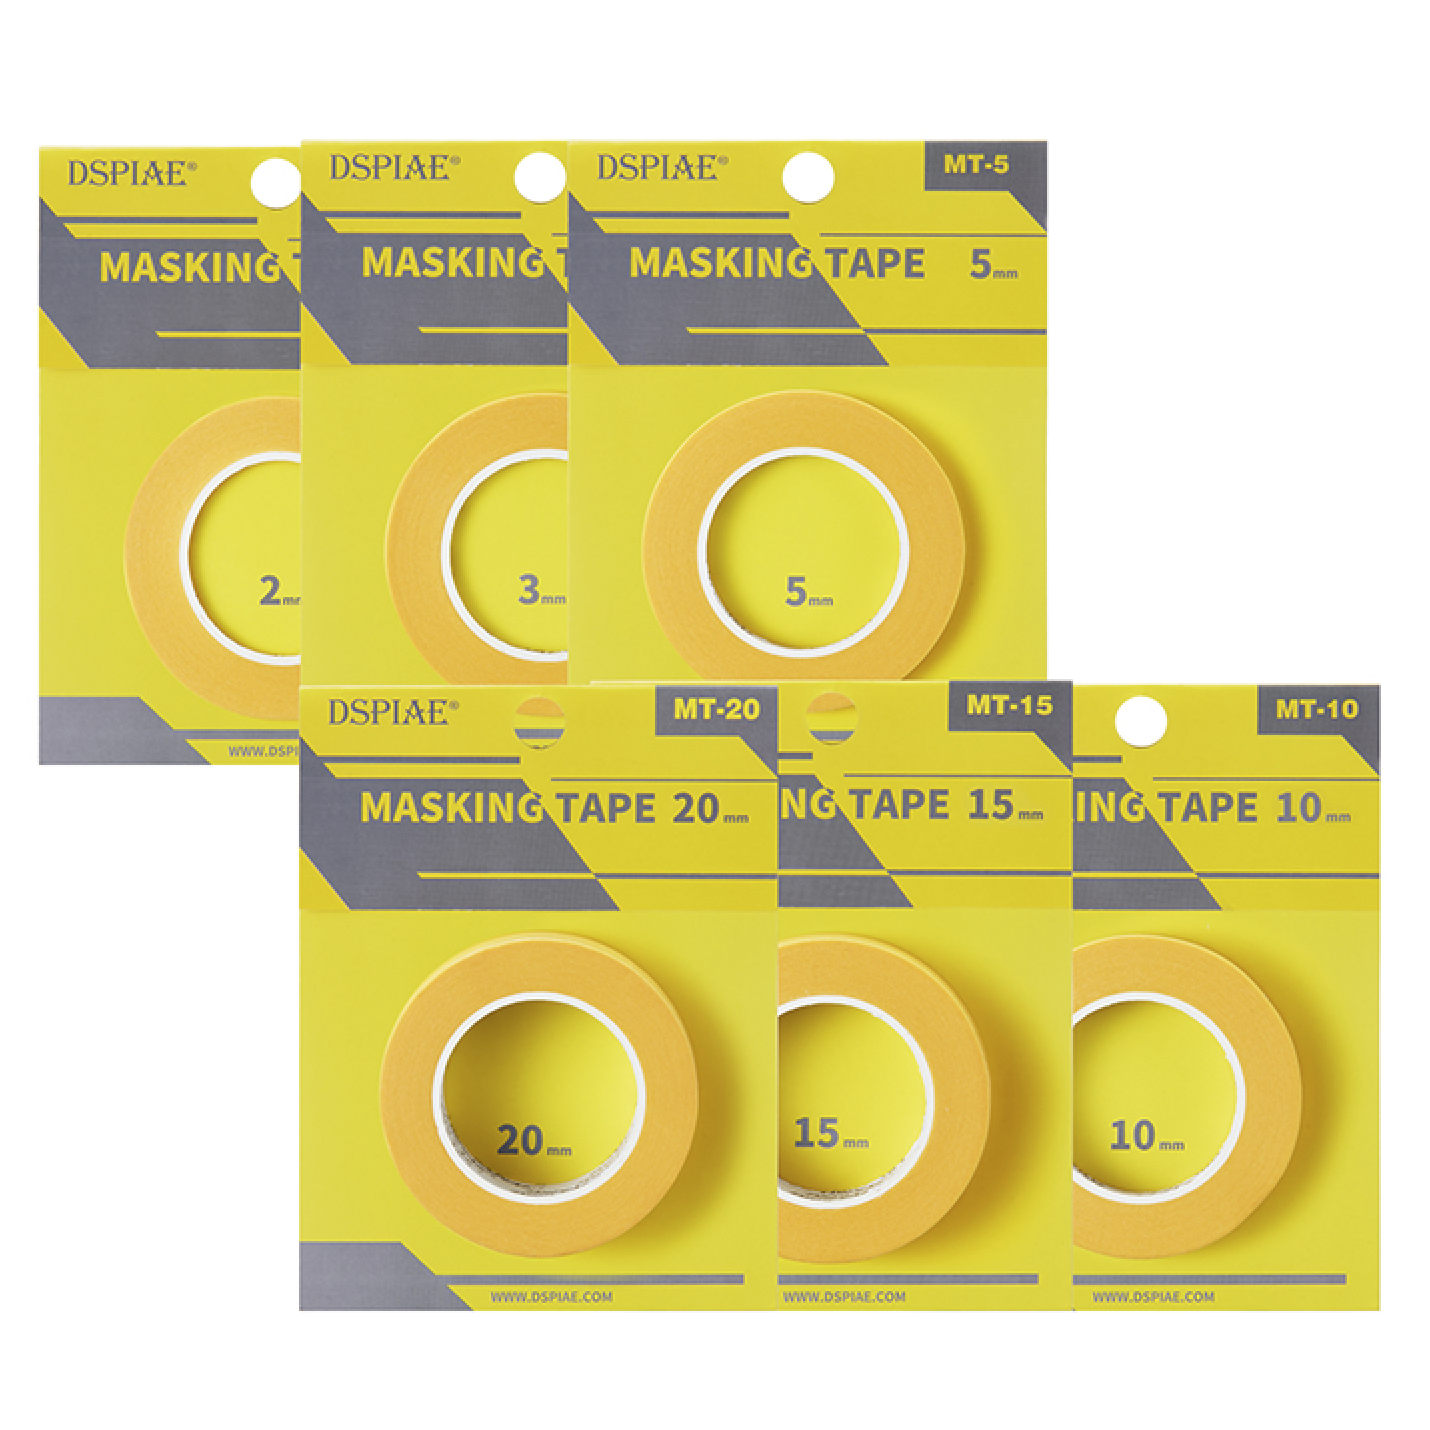 MT-05 DSPIAE Masking Tape 5 mm